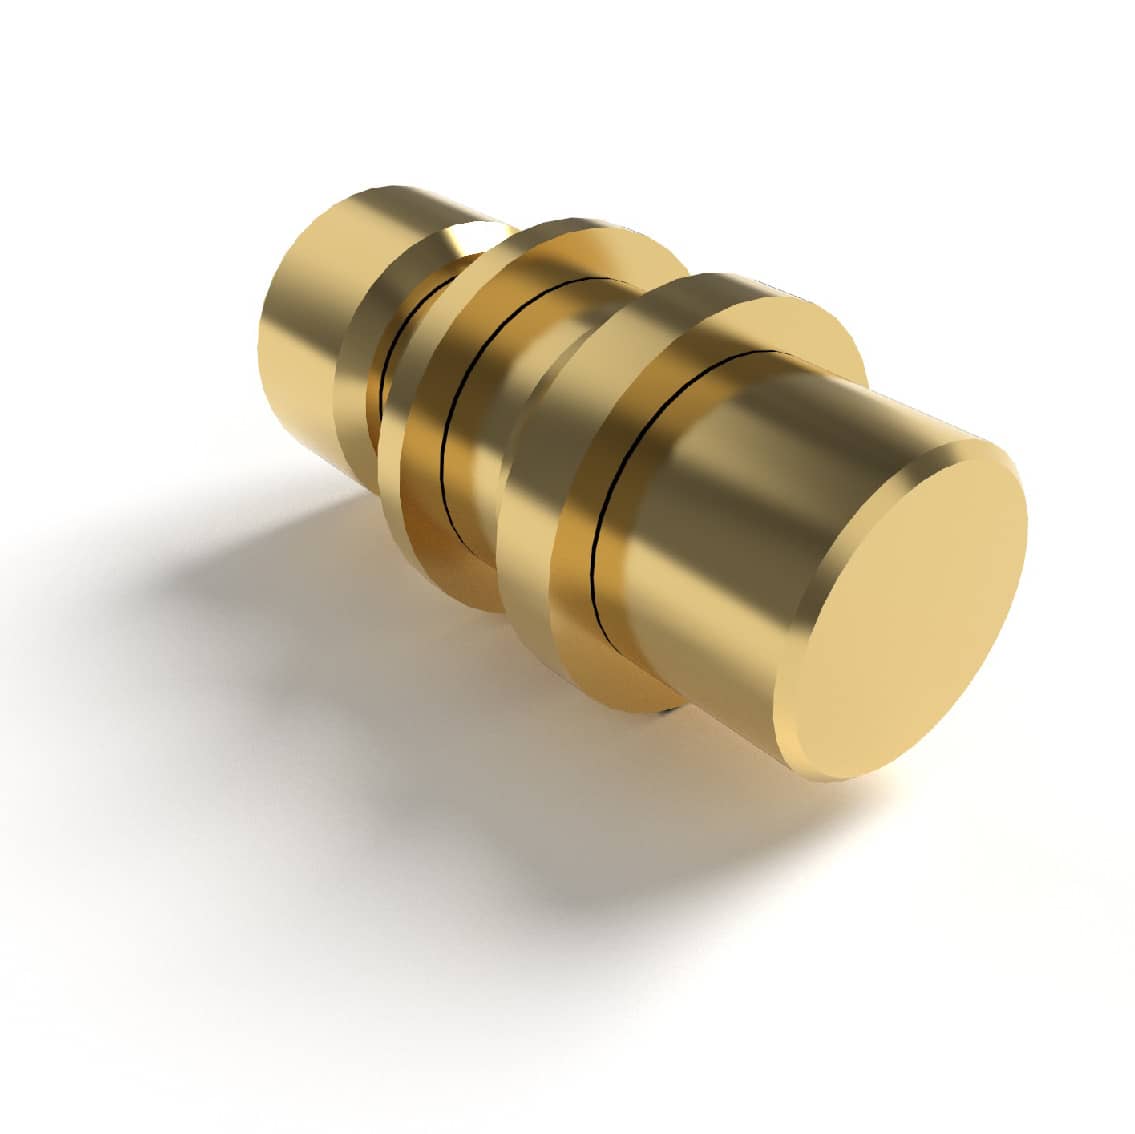 Female Machining Pin made of SUS with Gold plating Render